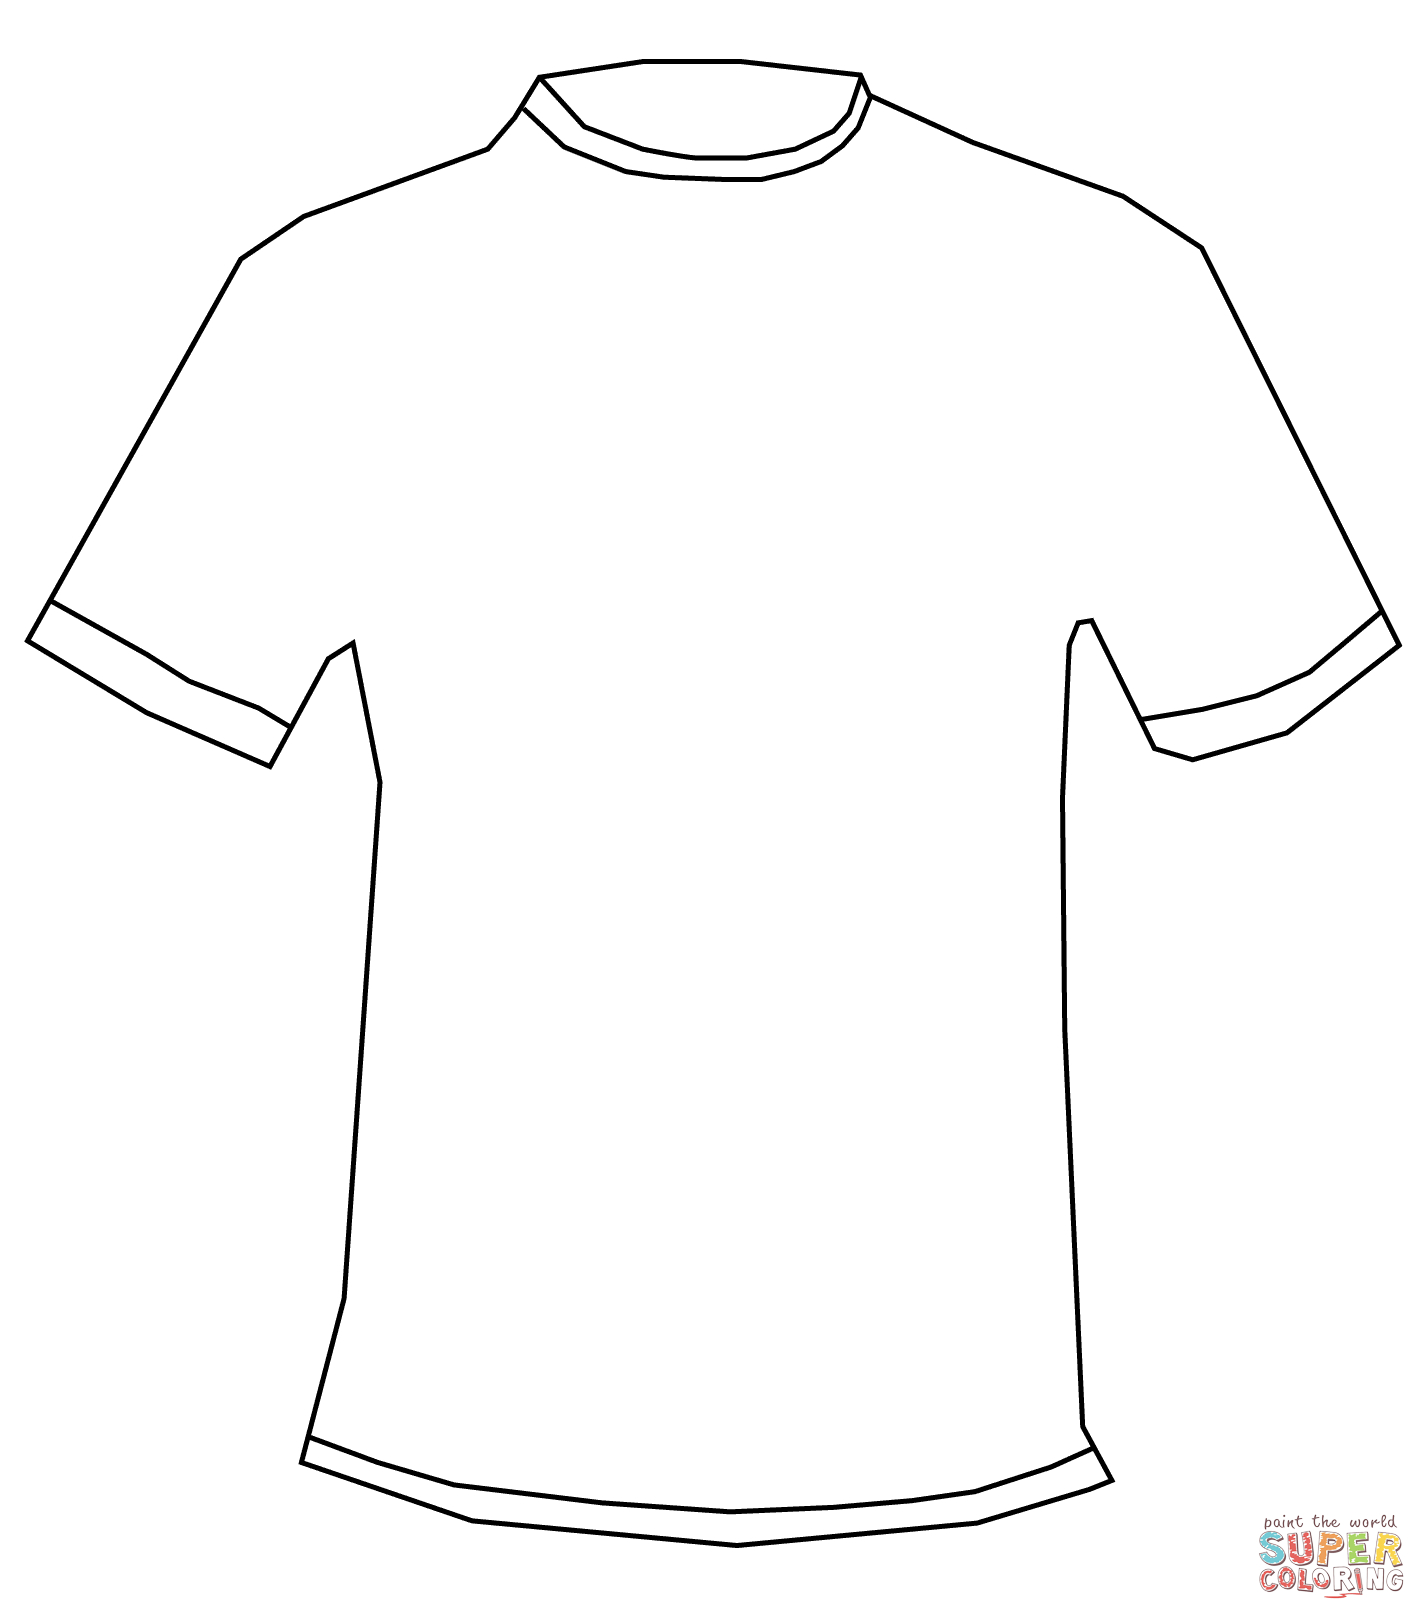 T Shirt Coloring Page | Free Printable Coloring Pages Throughout Blank Tshirt Template Printable